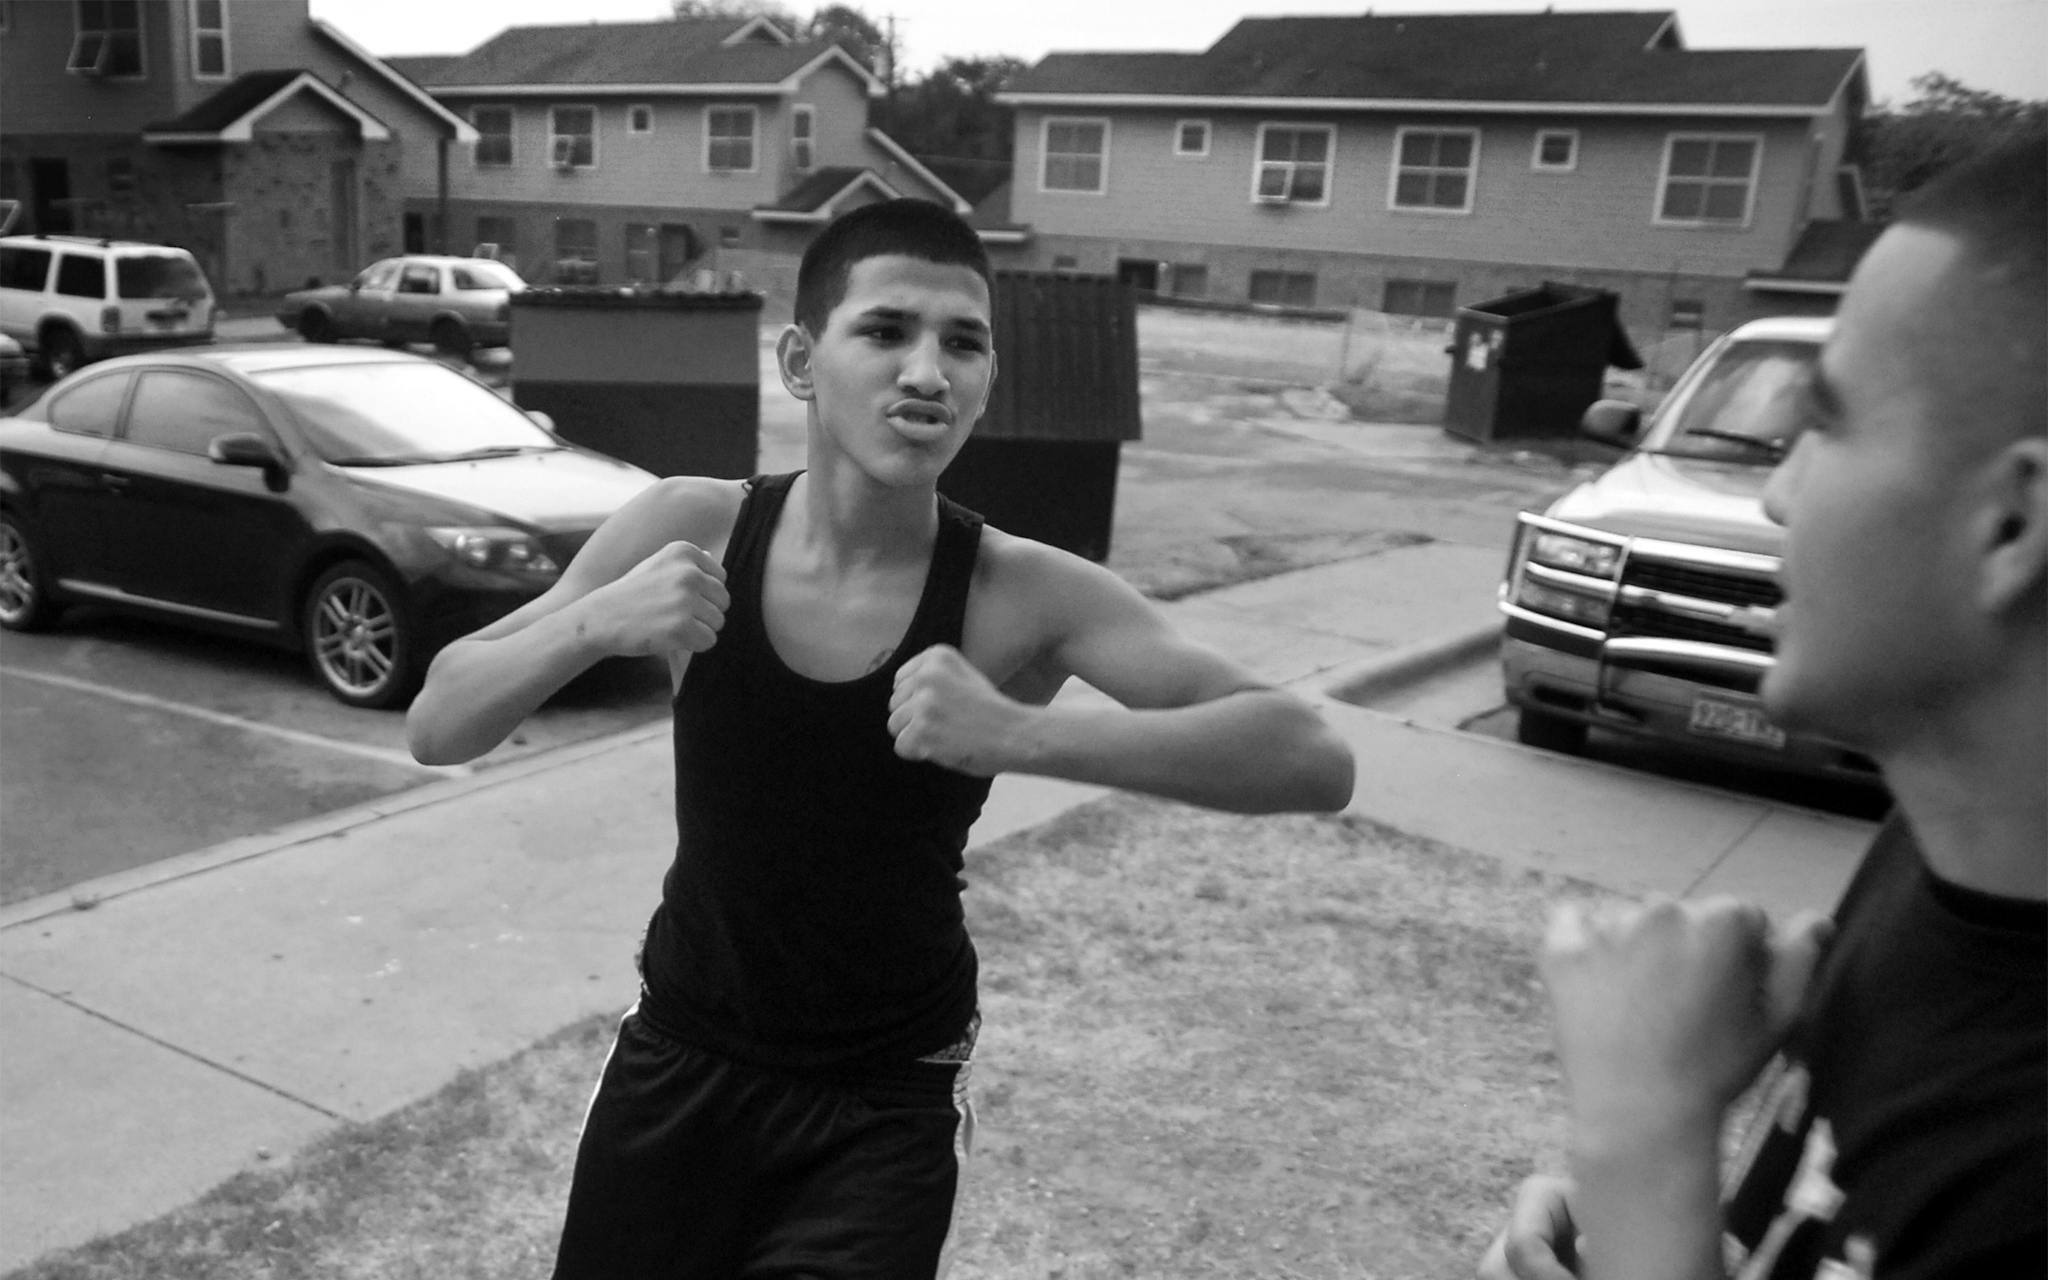 Christian jokingly boxes with his friend Ricardo Lara at Booker T. on July 22, 2009.